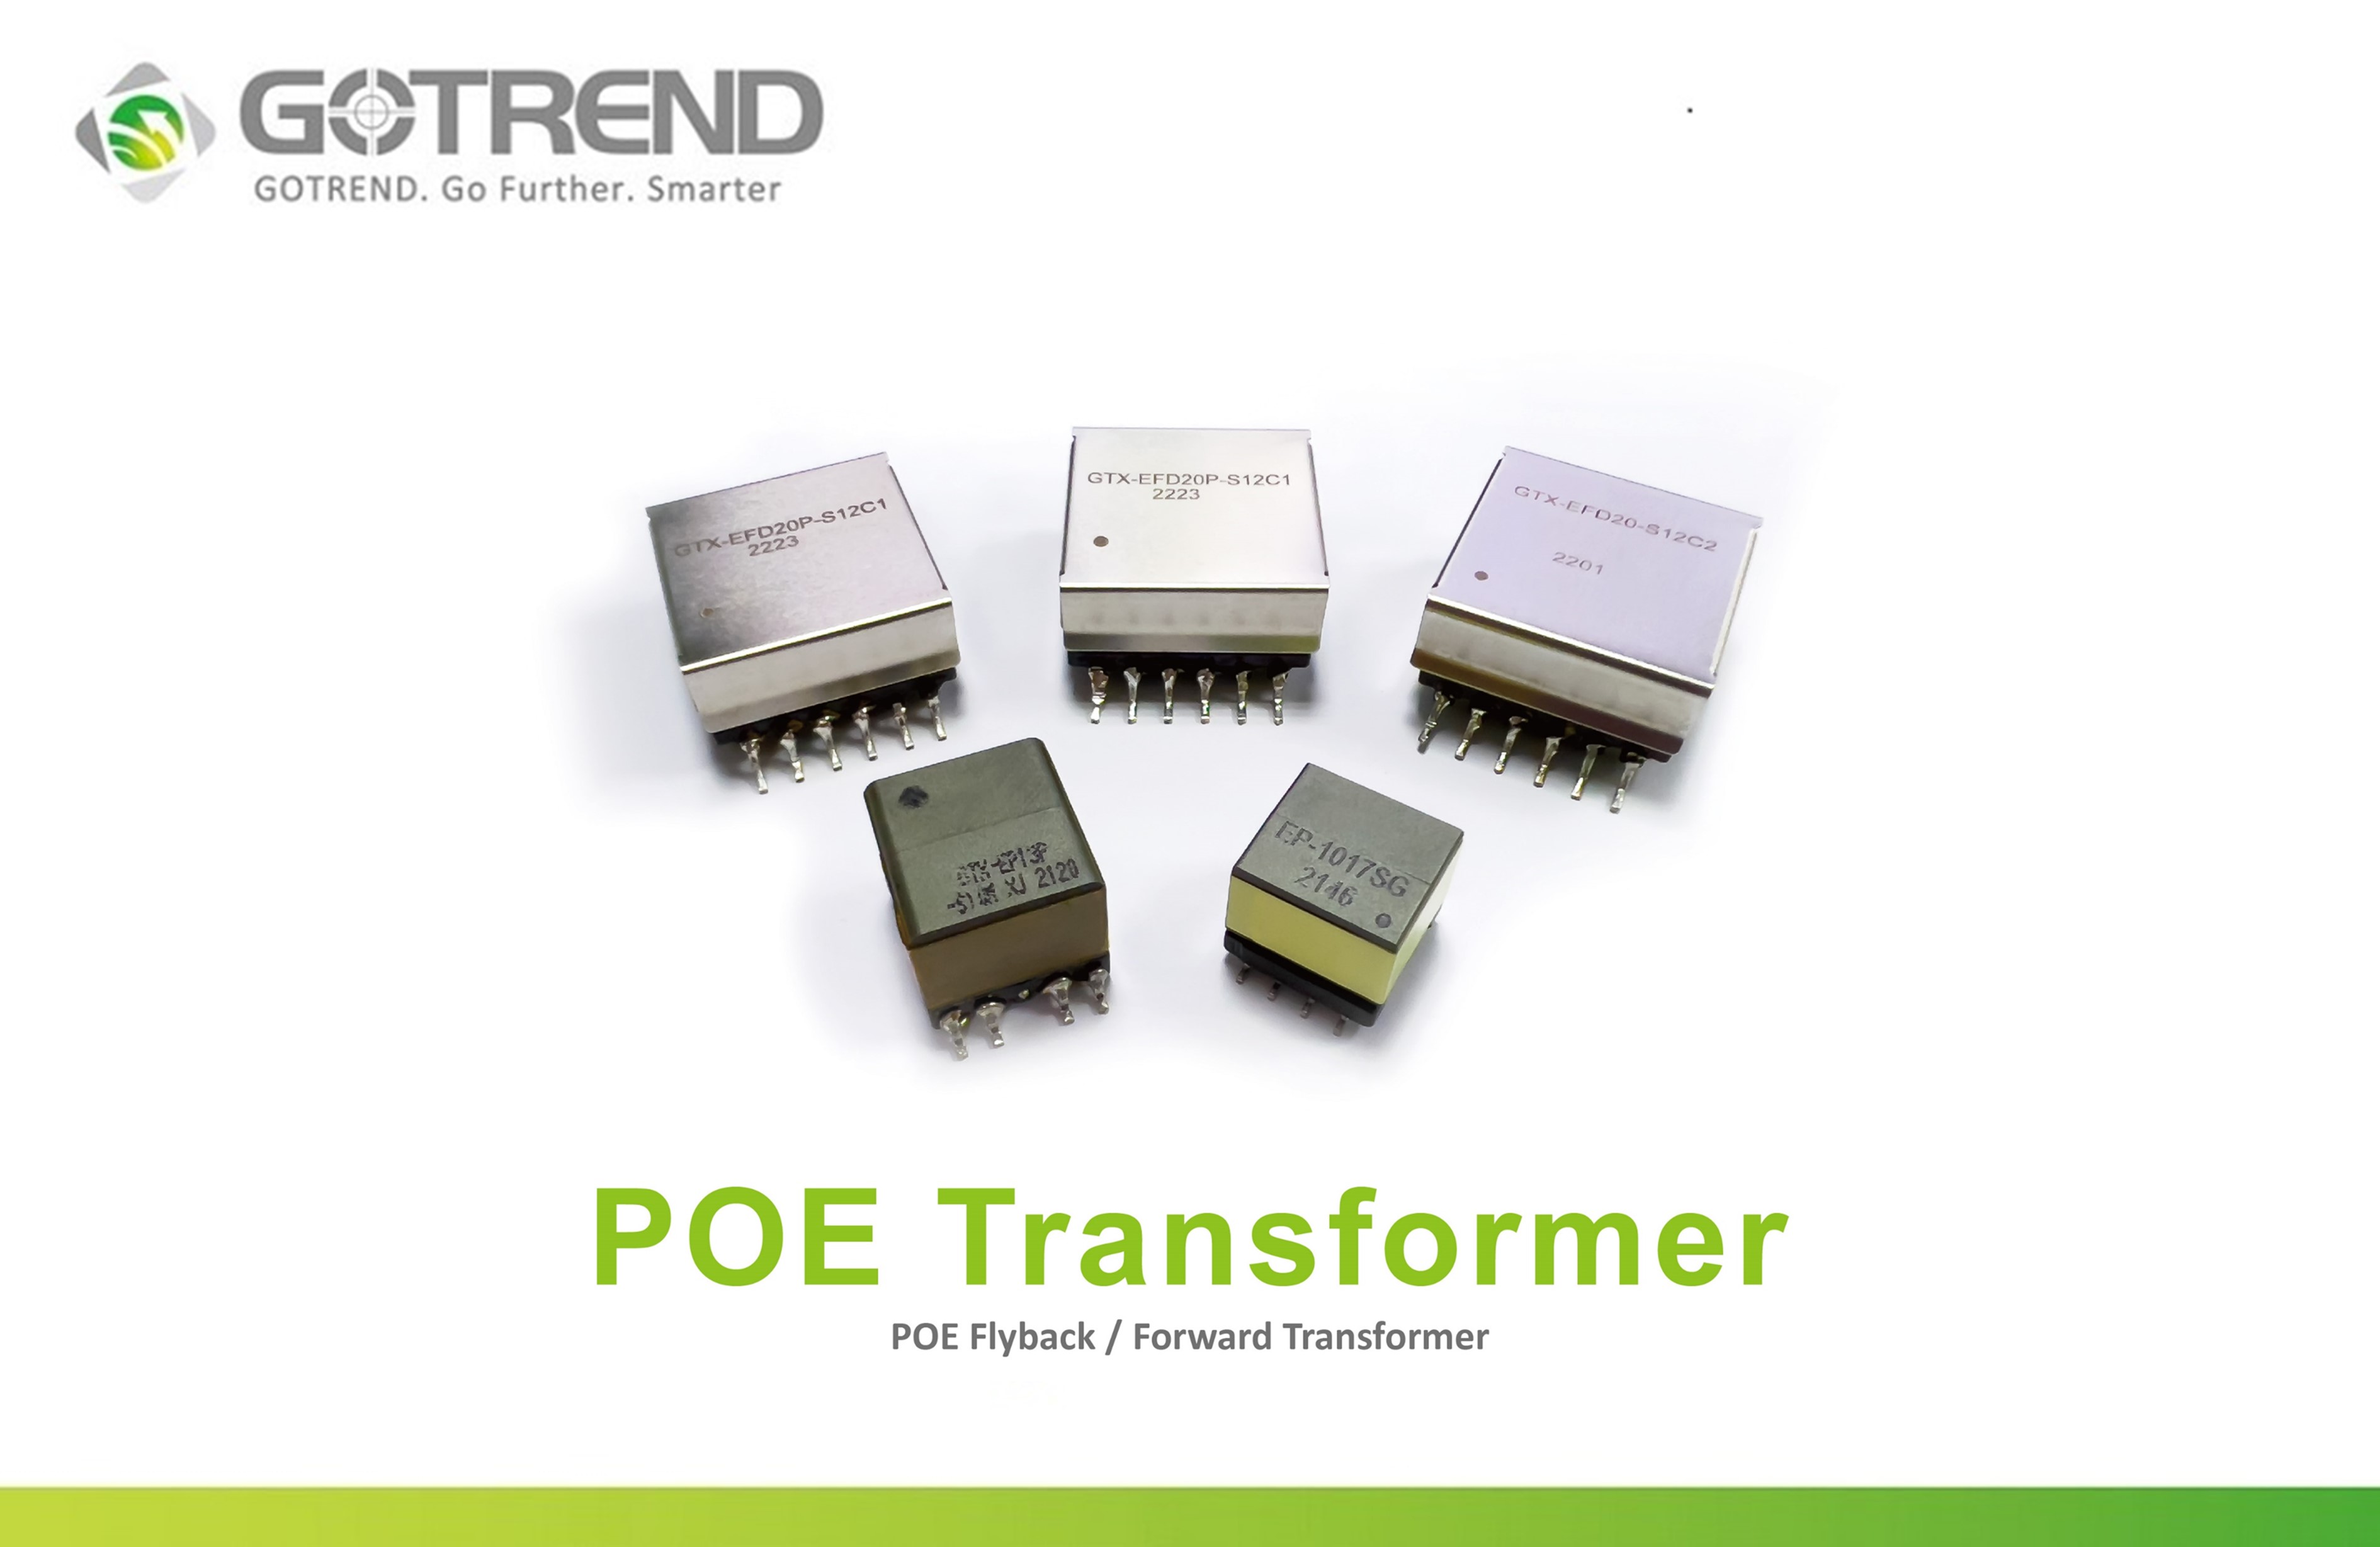 GOTREND article-GPOE Series New Power over Ethernet